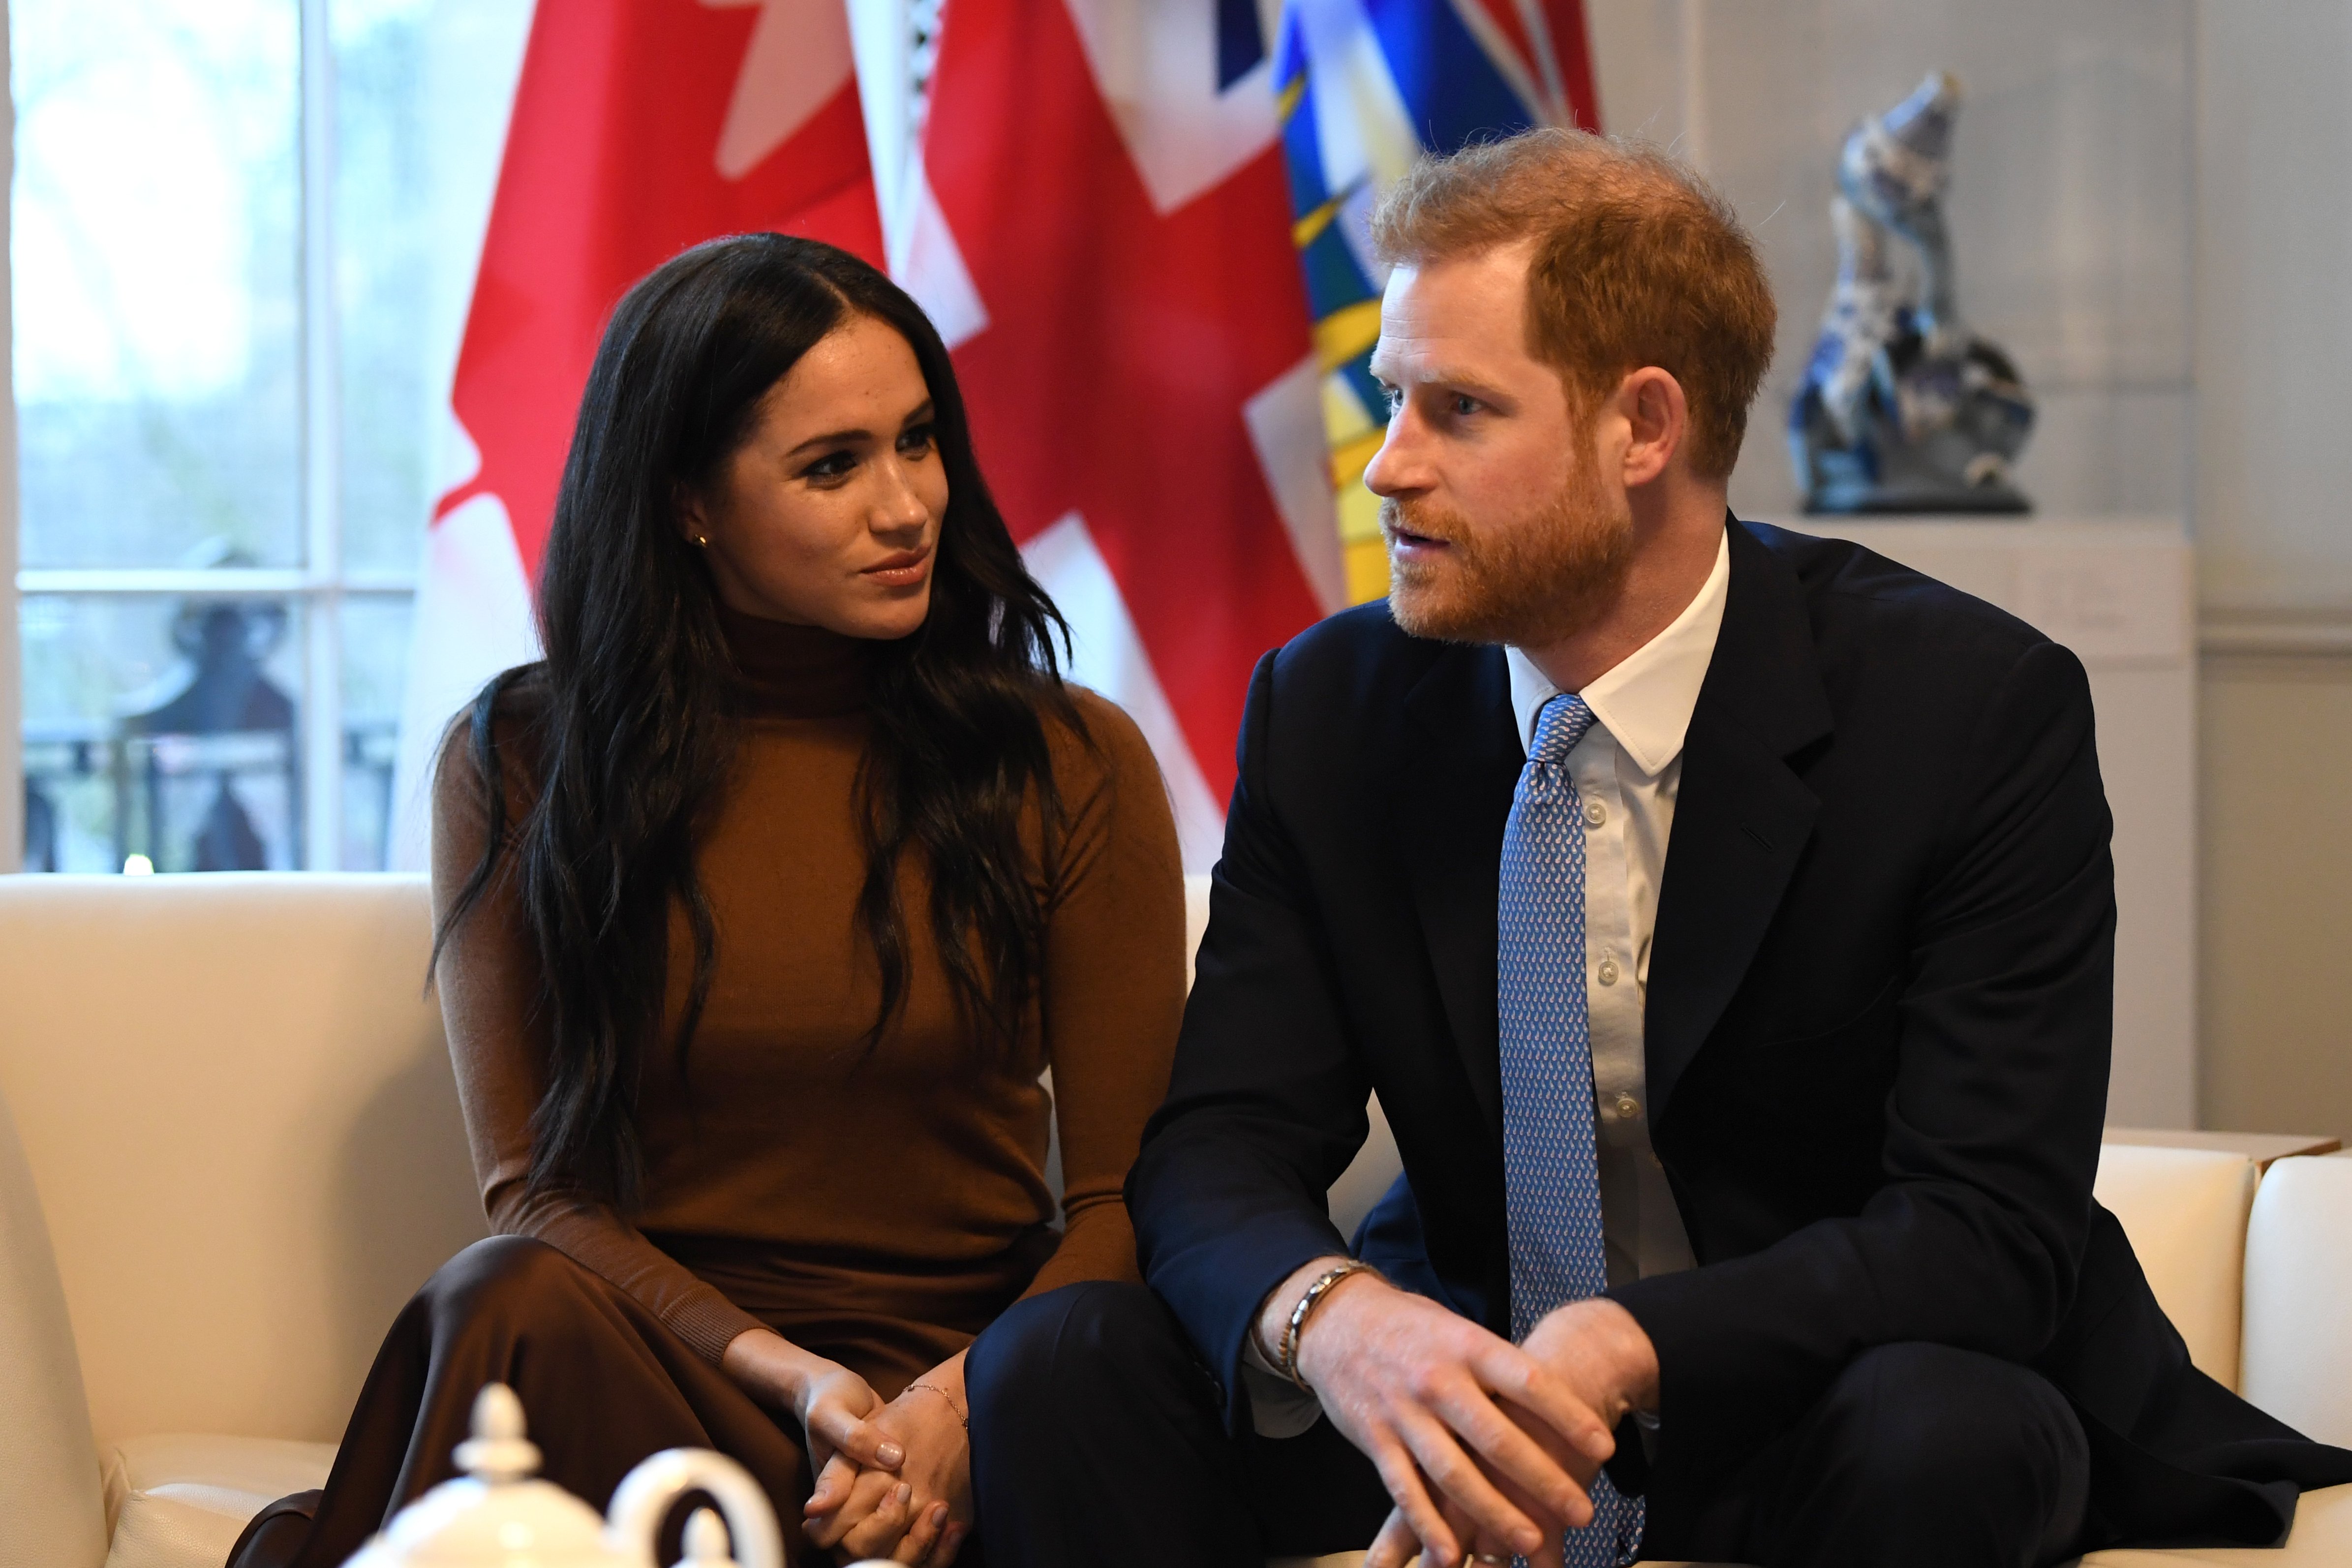 Prince Harry and Meghan Markle during their visit to Canada House on January 7, 2020 in London, England | Photo: Getty Images